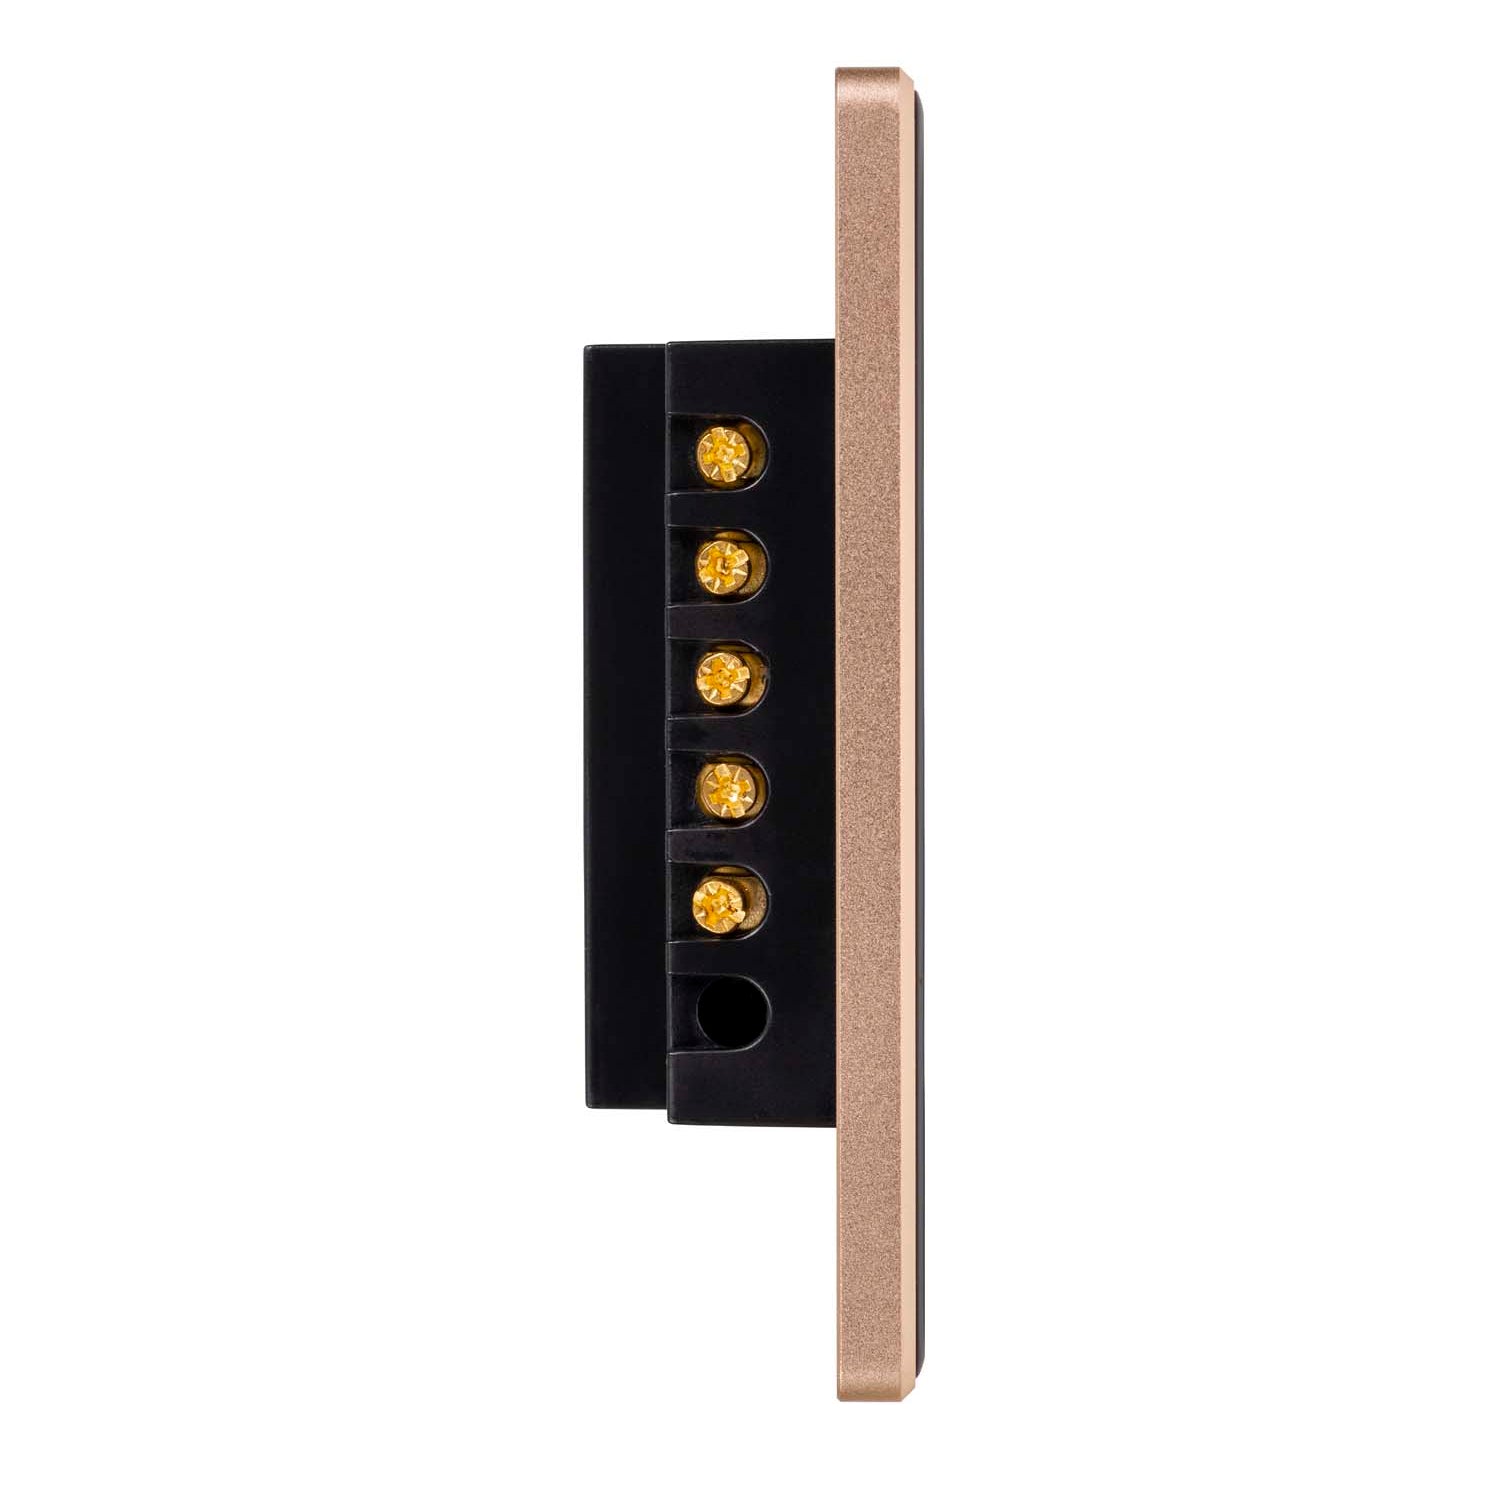 HV9220-3 - Wifi 3 Gang Black with Gold Trim Wall Switch